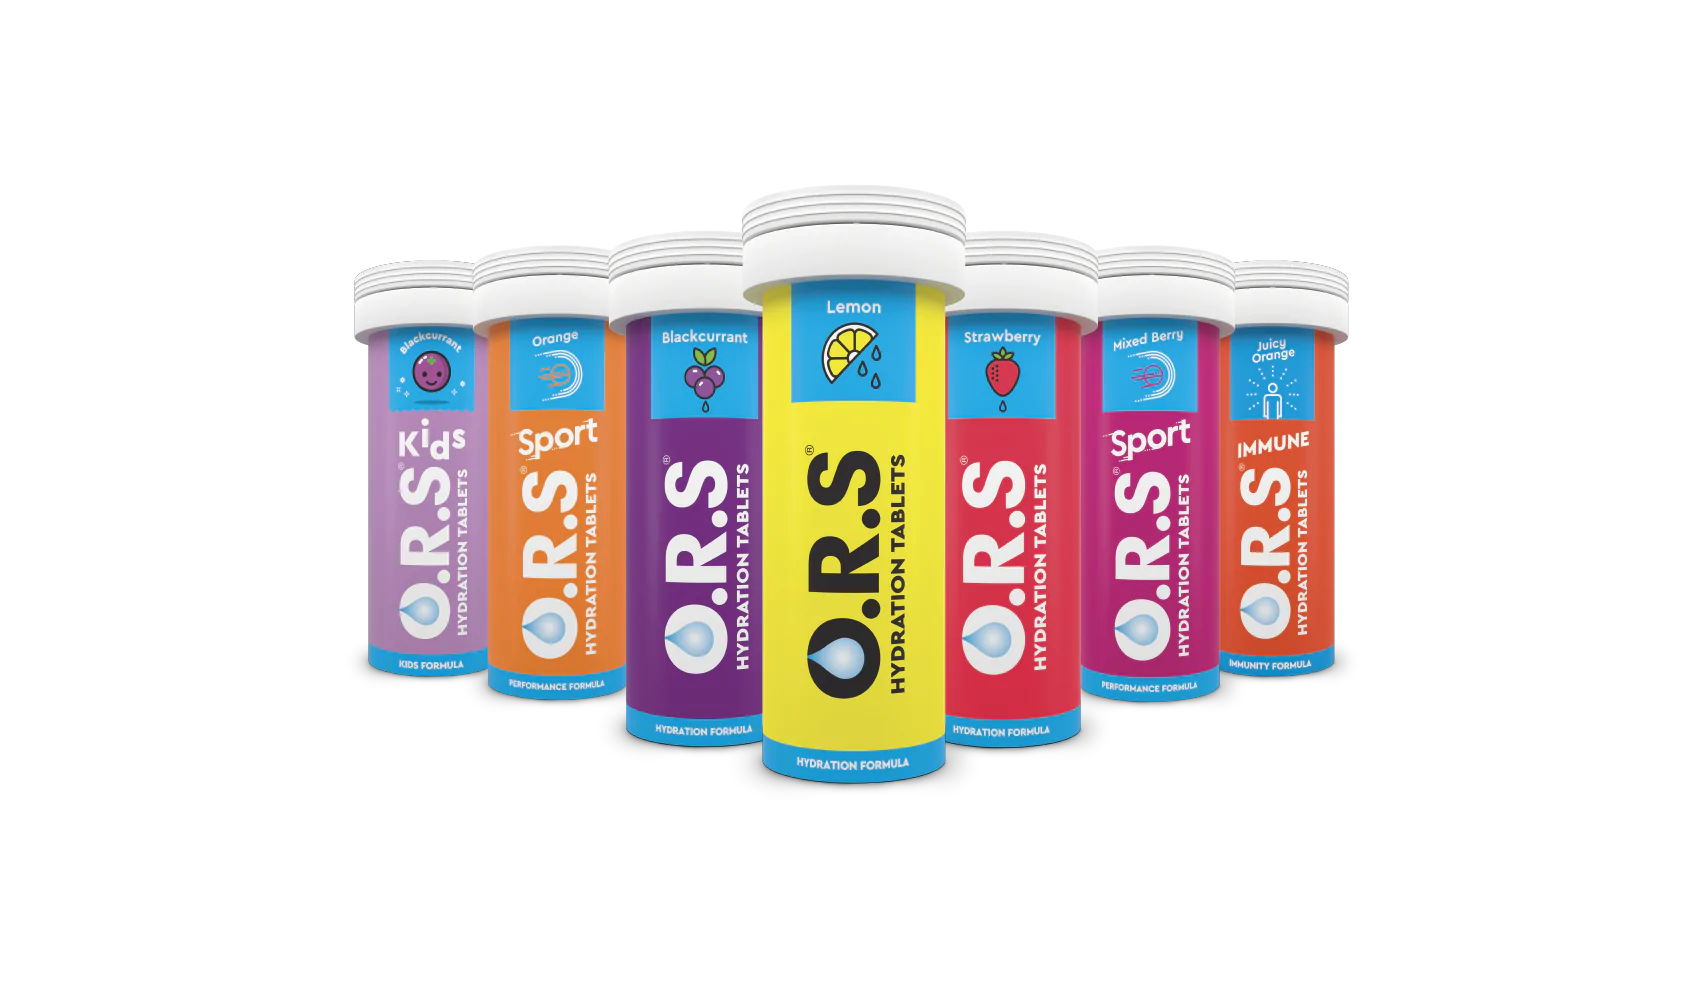 O. R. S hydration tablets – when water isn’t enough